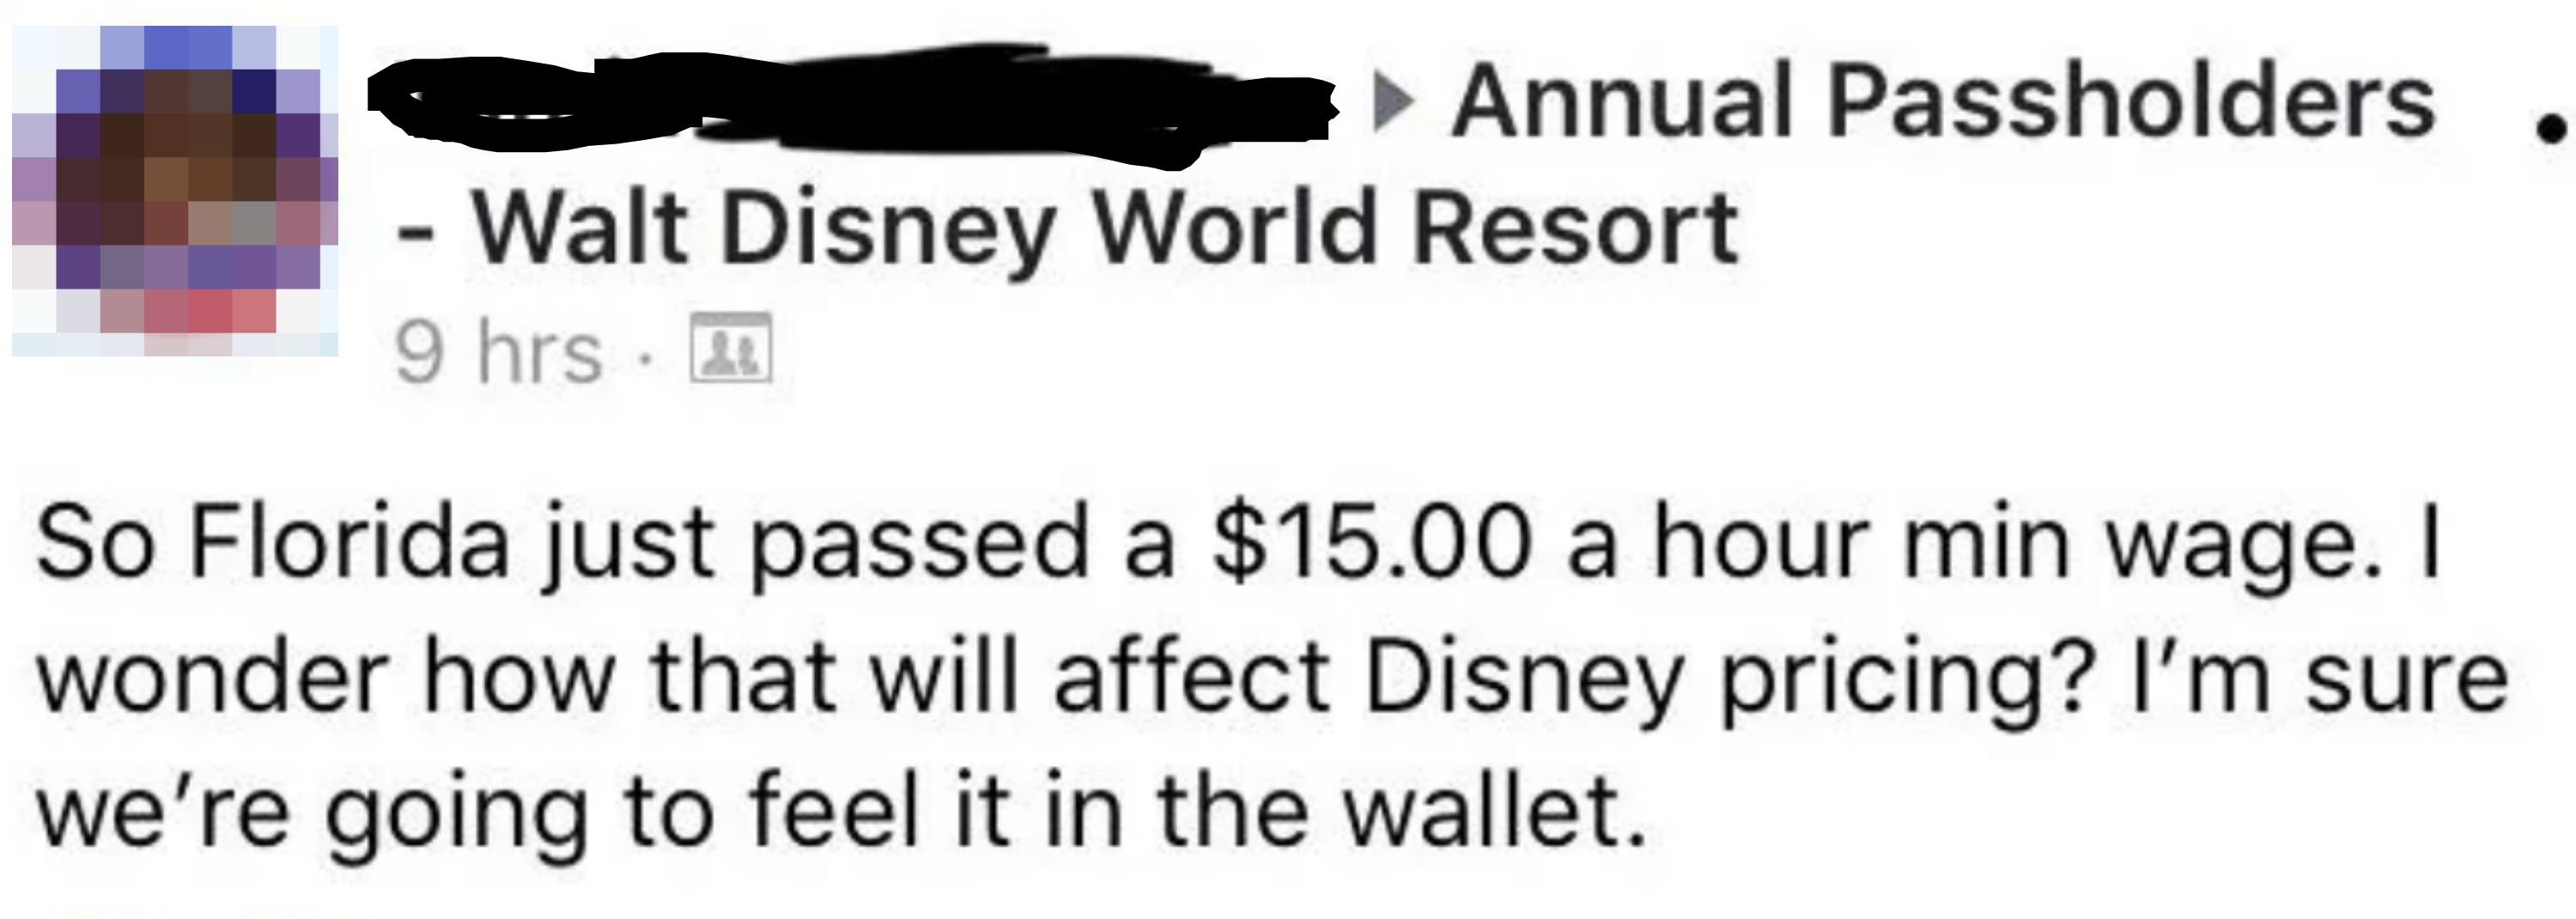 A Facebook post from Tami discussing Florida&#x27;s new $15 minimum wage and speculating on its impact on Disney pricing